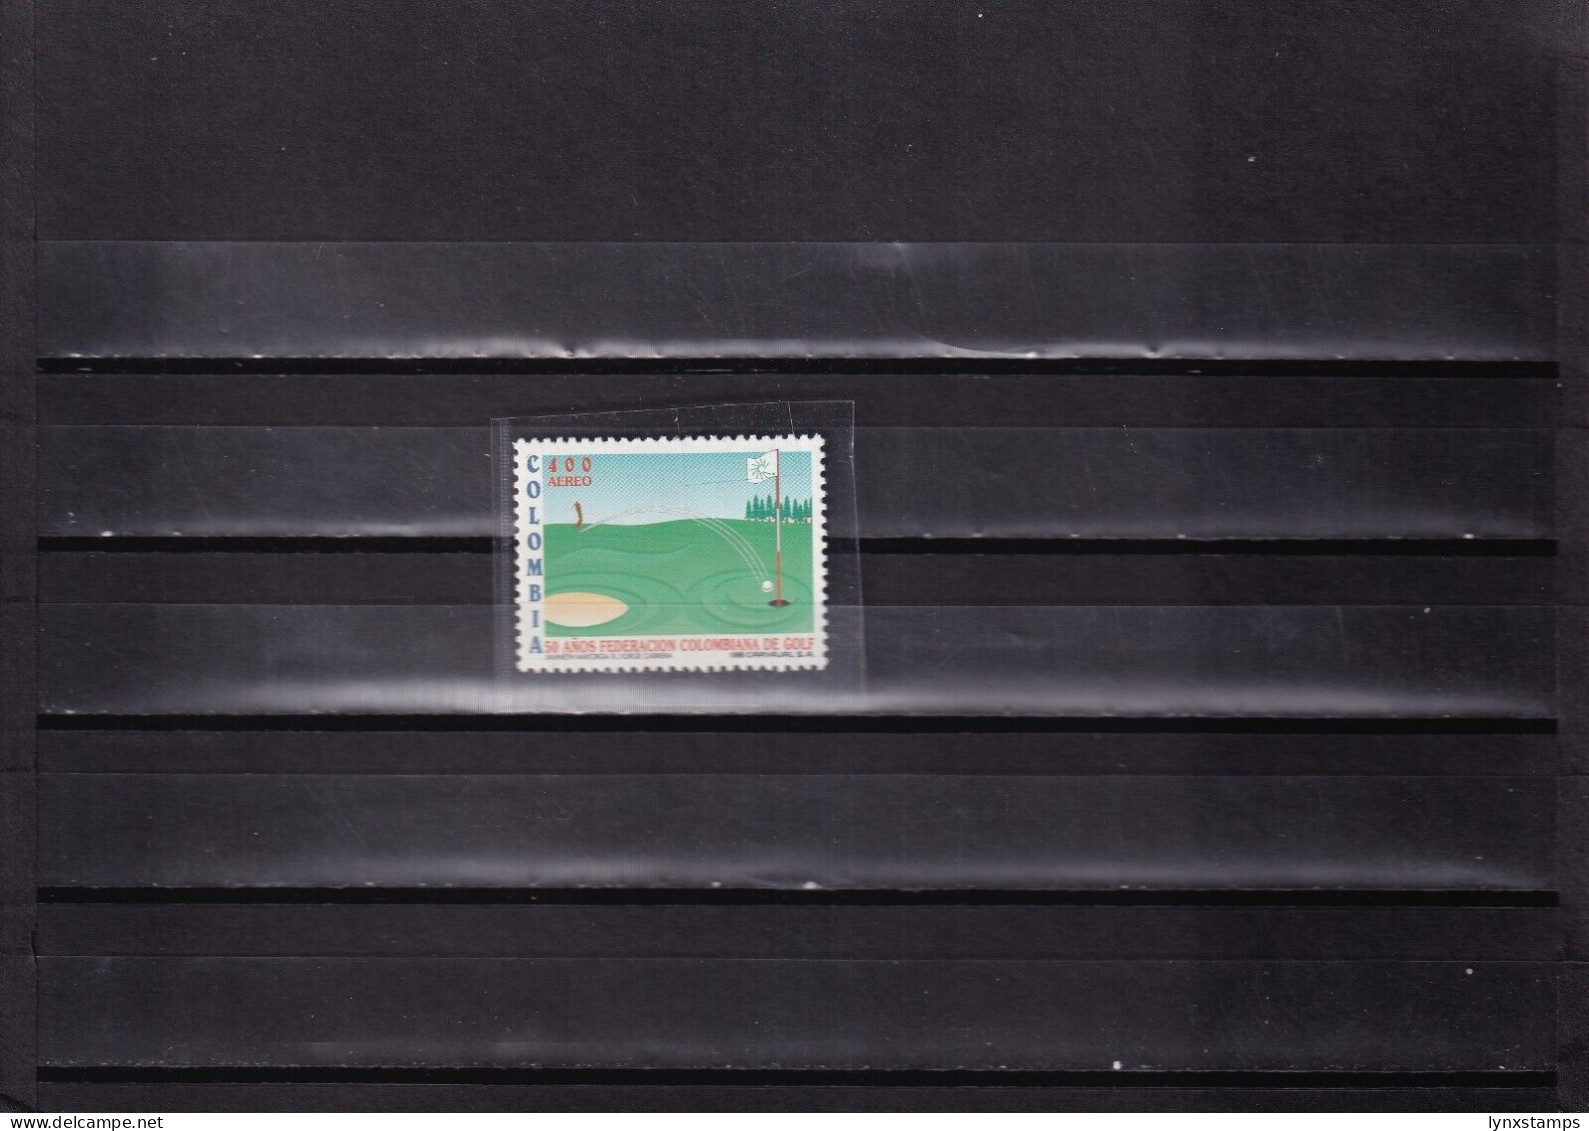 ER03 Colombia 1996 Colombian Golf Federation 50th Anniv. MNH Stamp - Colombie